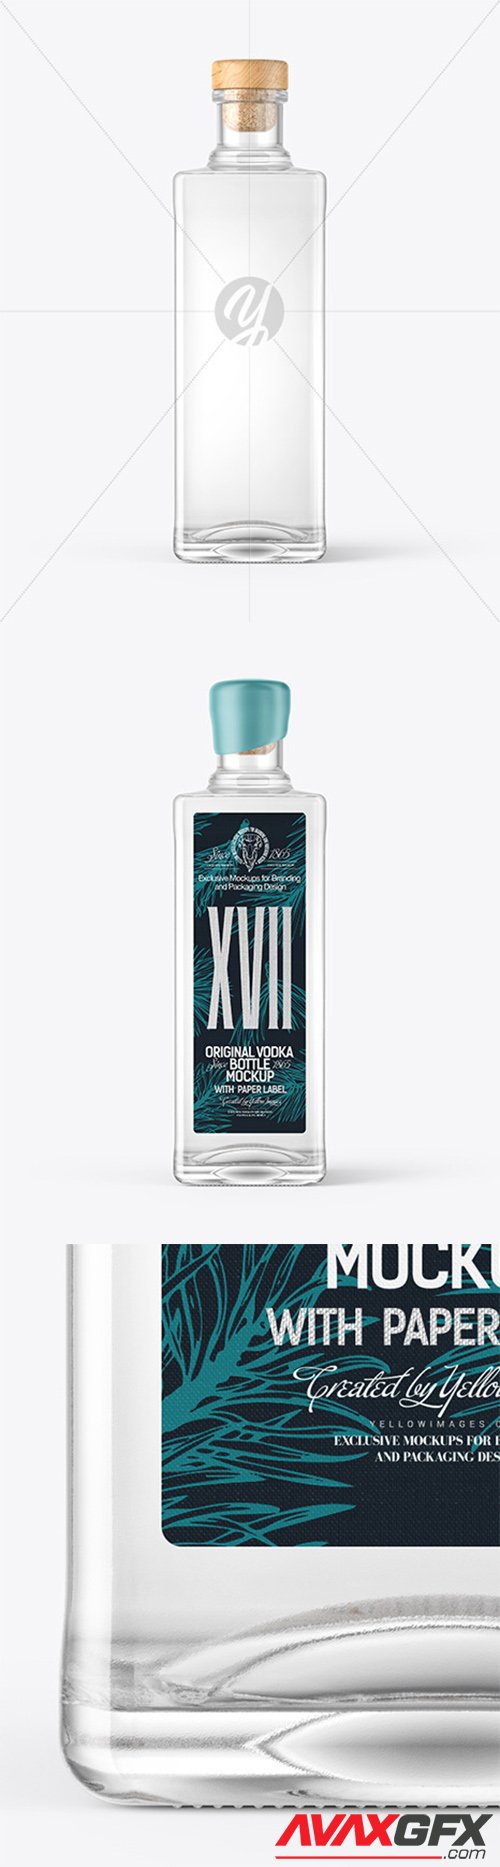 Download Square Vodka Bottle Mockup 61300 Avaxgfx All Downloads That You Need In One Place Graphic From Nitroflare Rapidgator